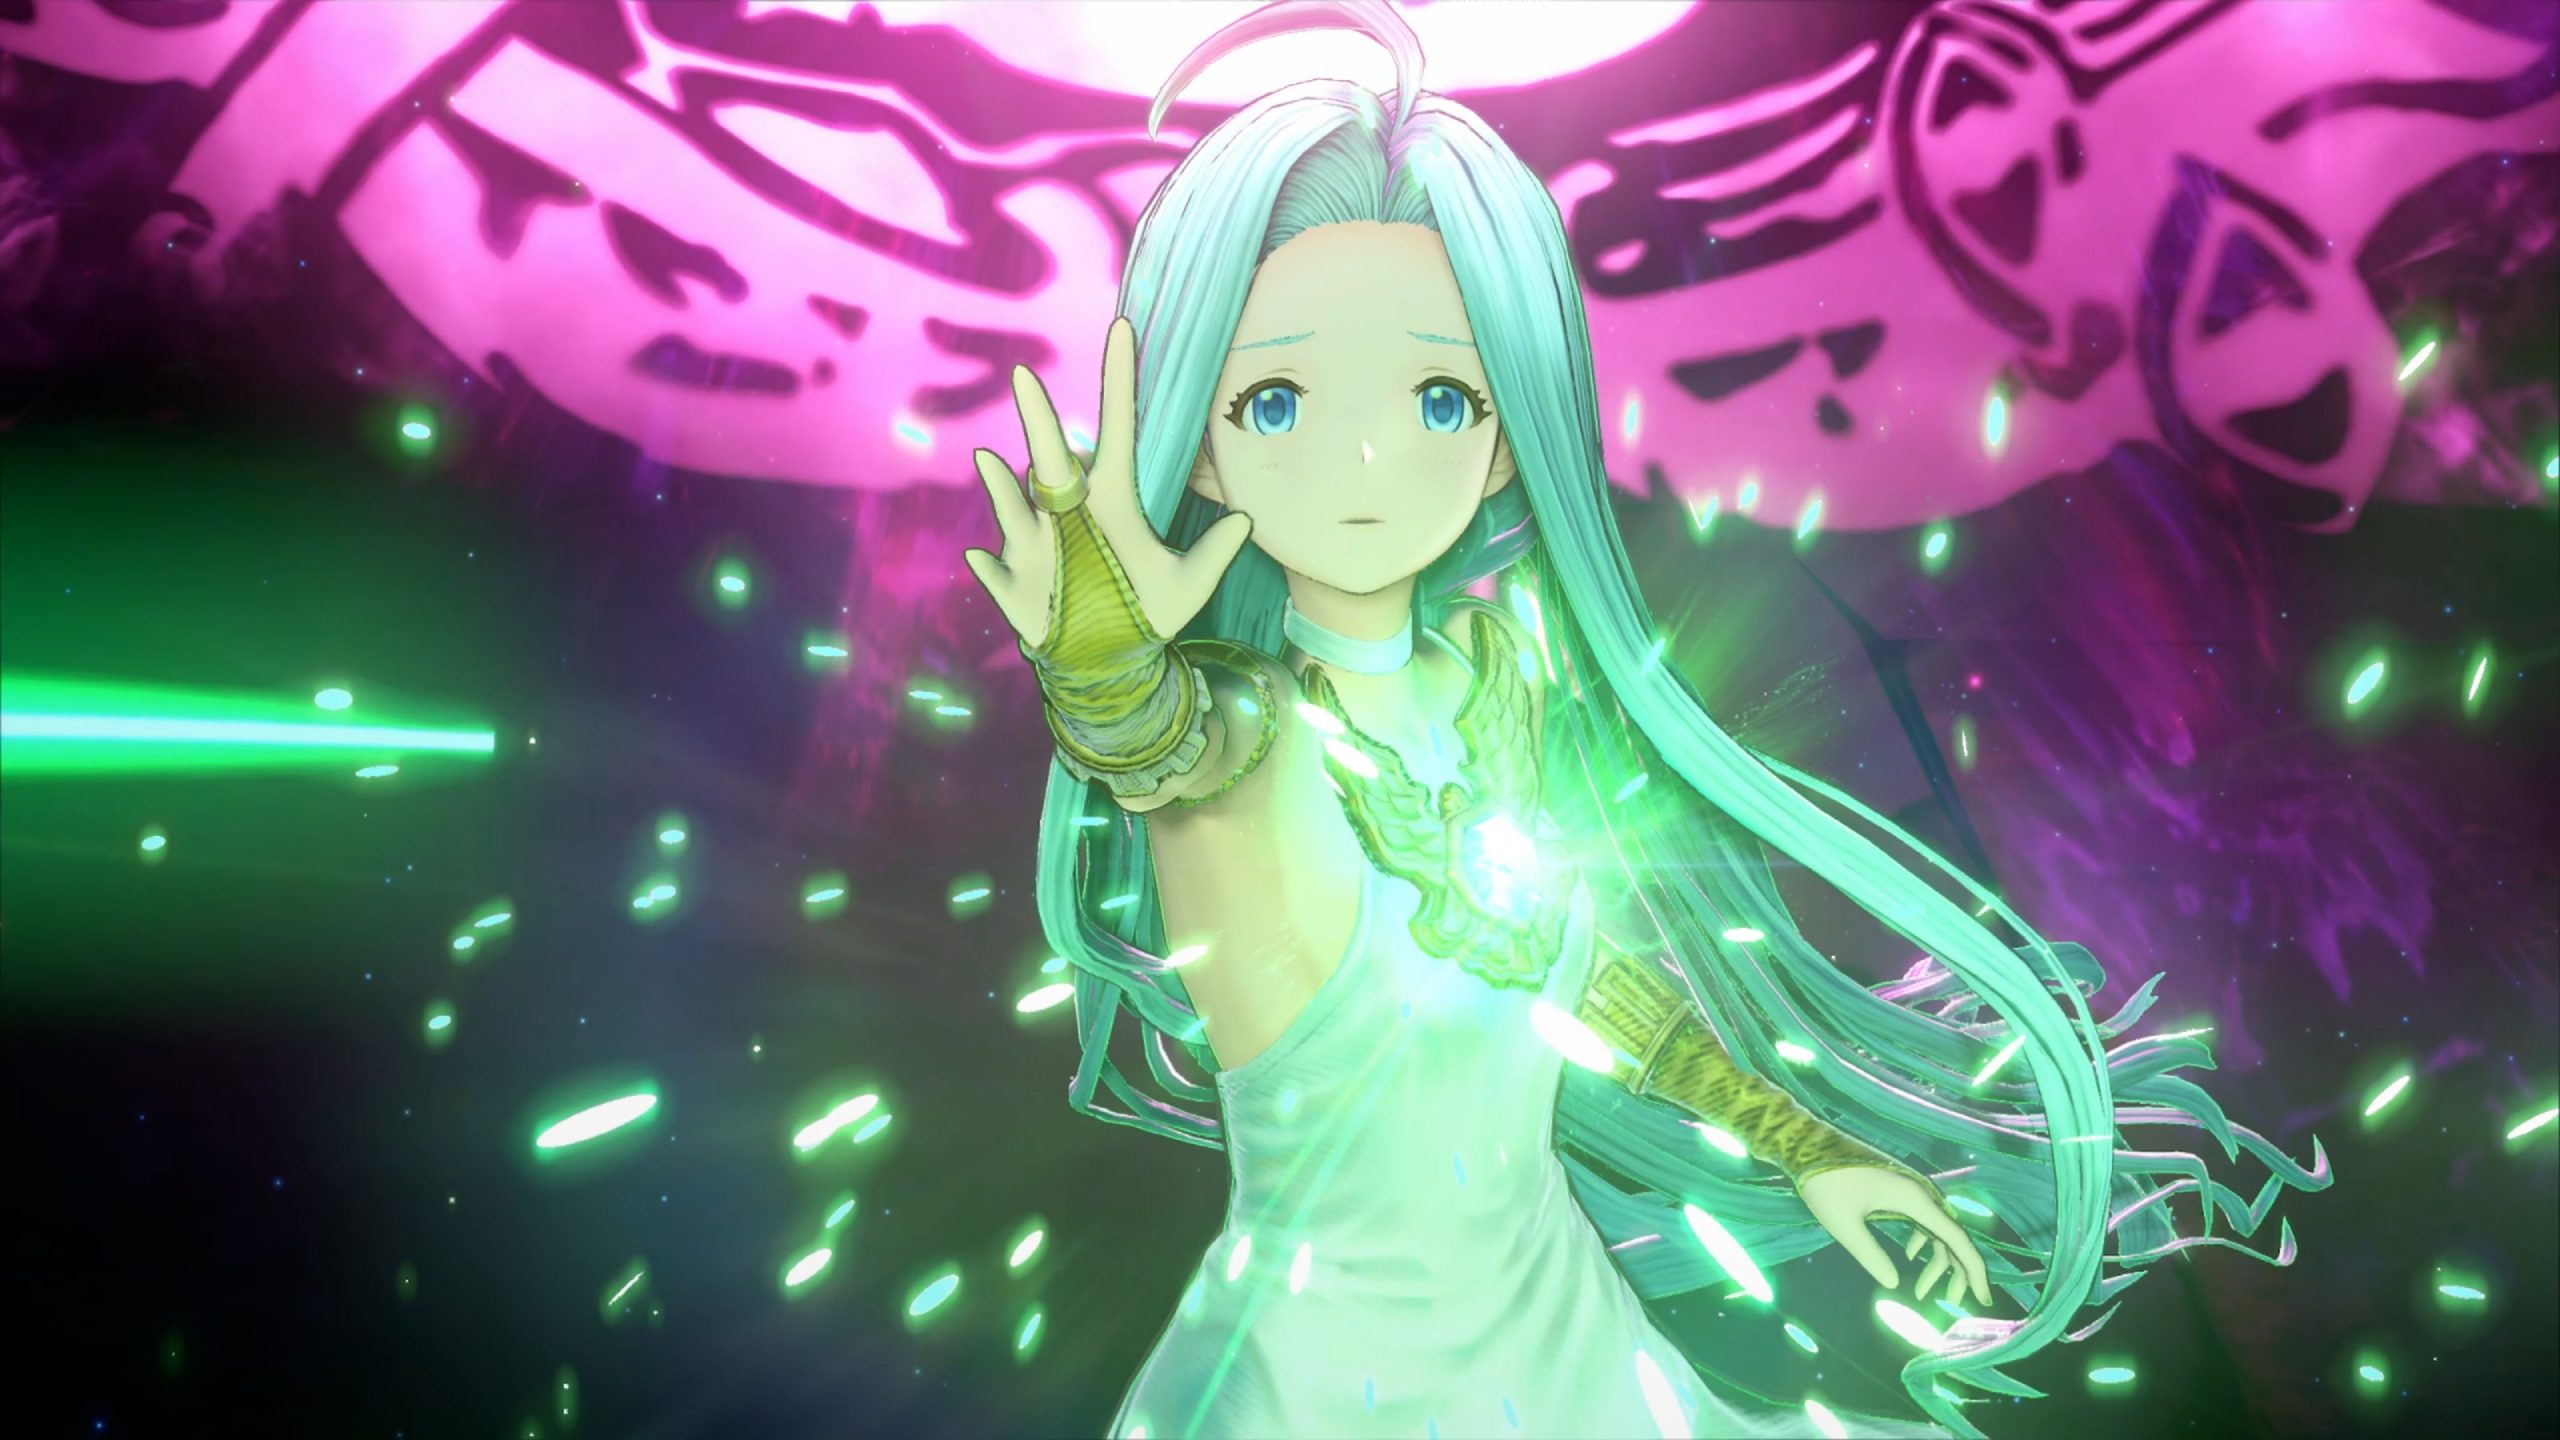 Granblue Fantasy: Relink Kicks Off 2024 With February Release